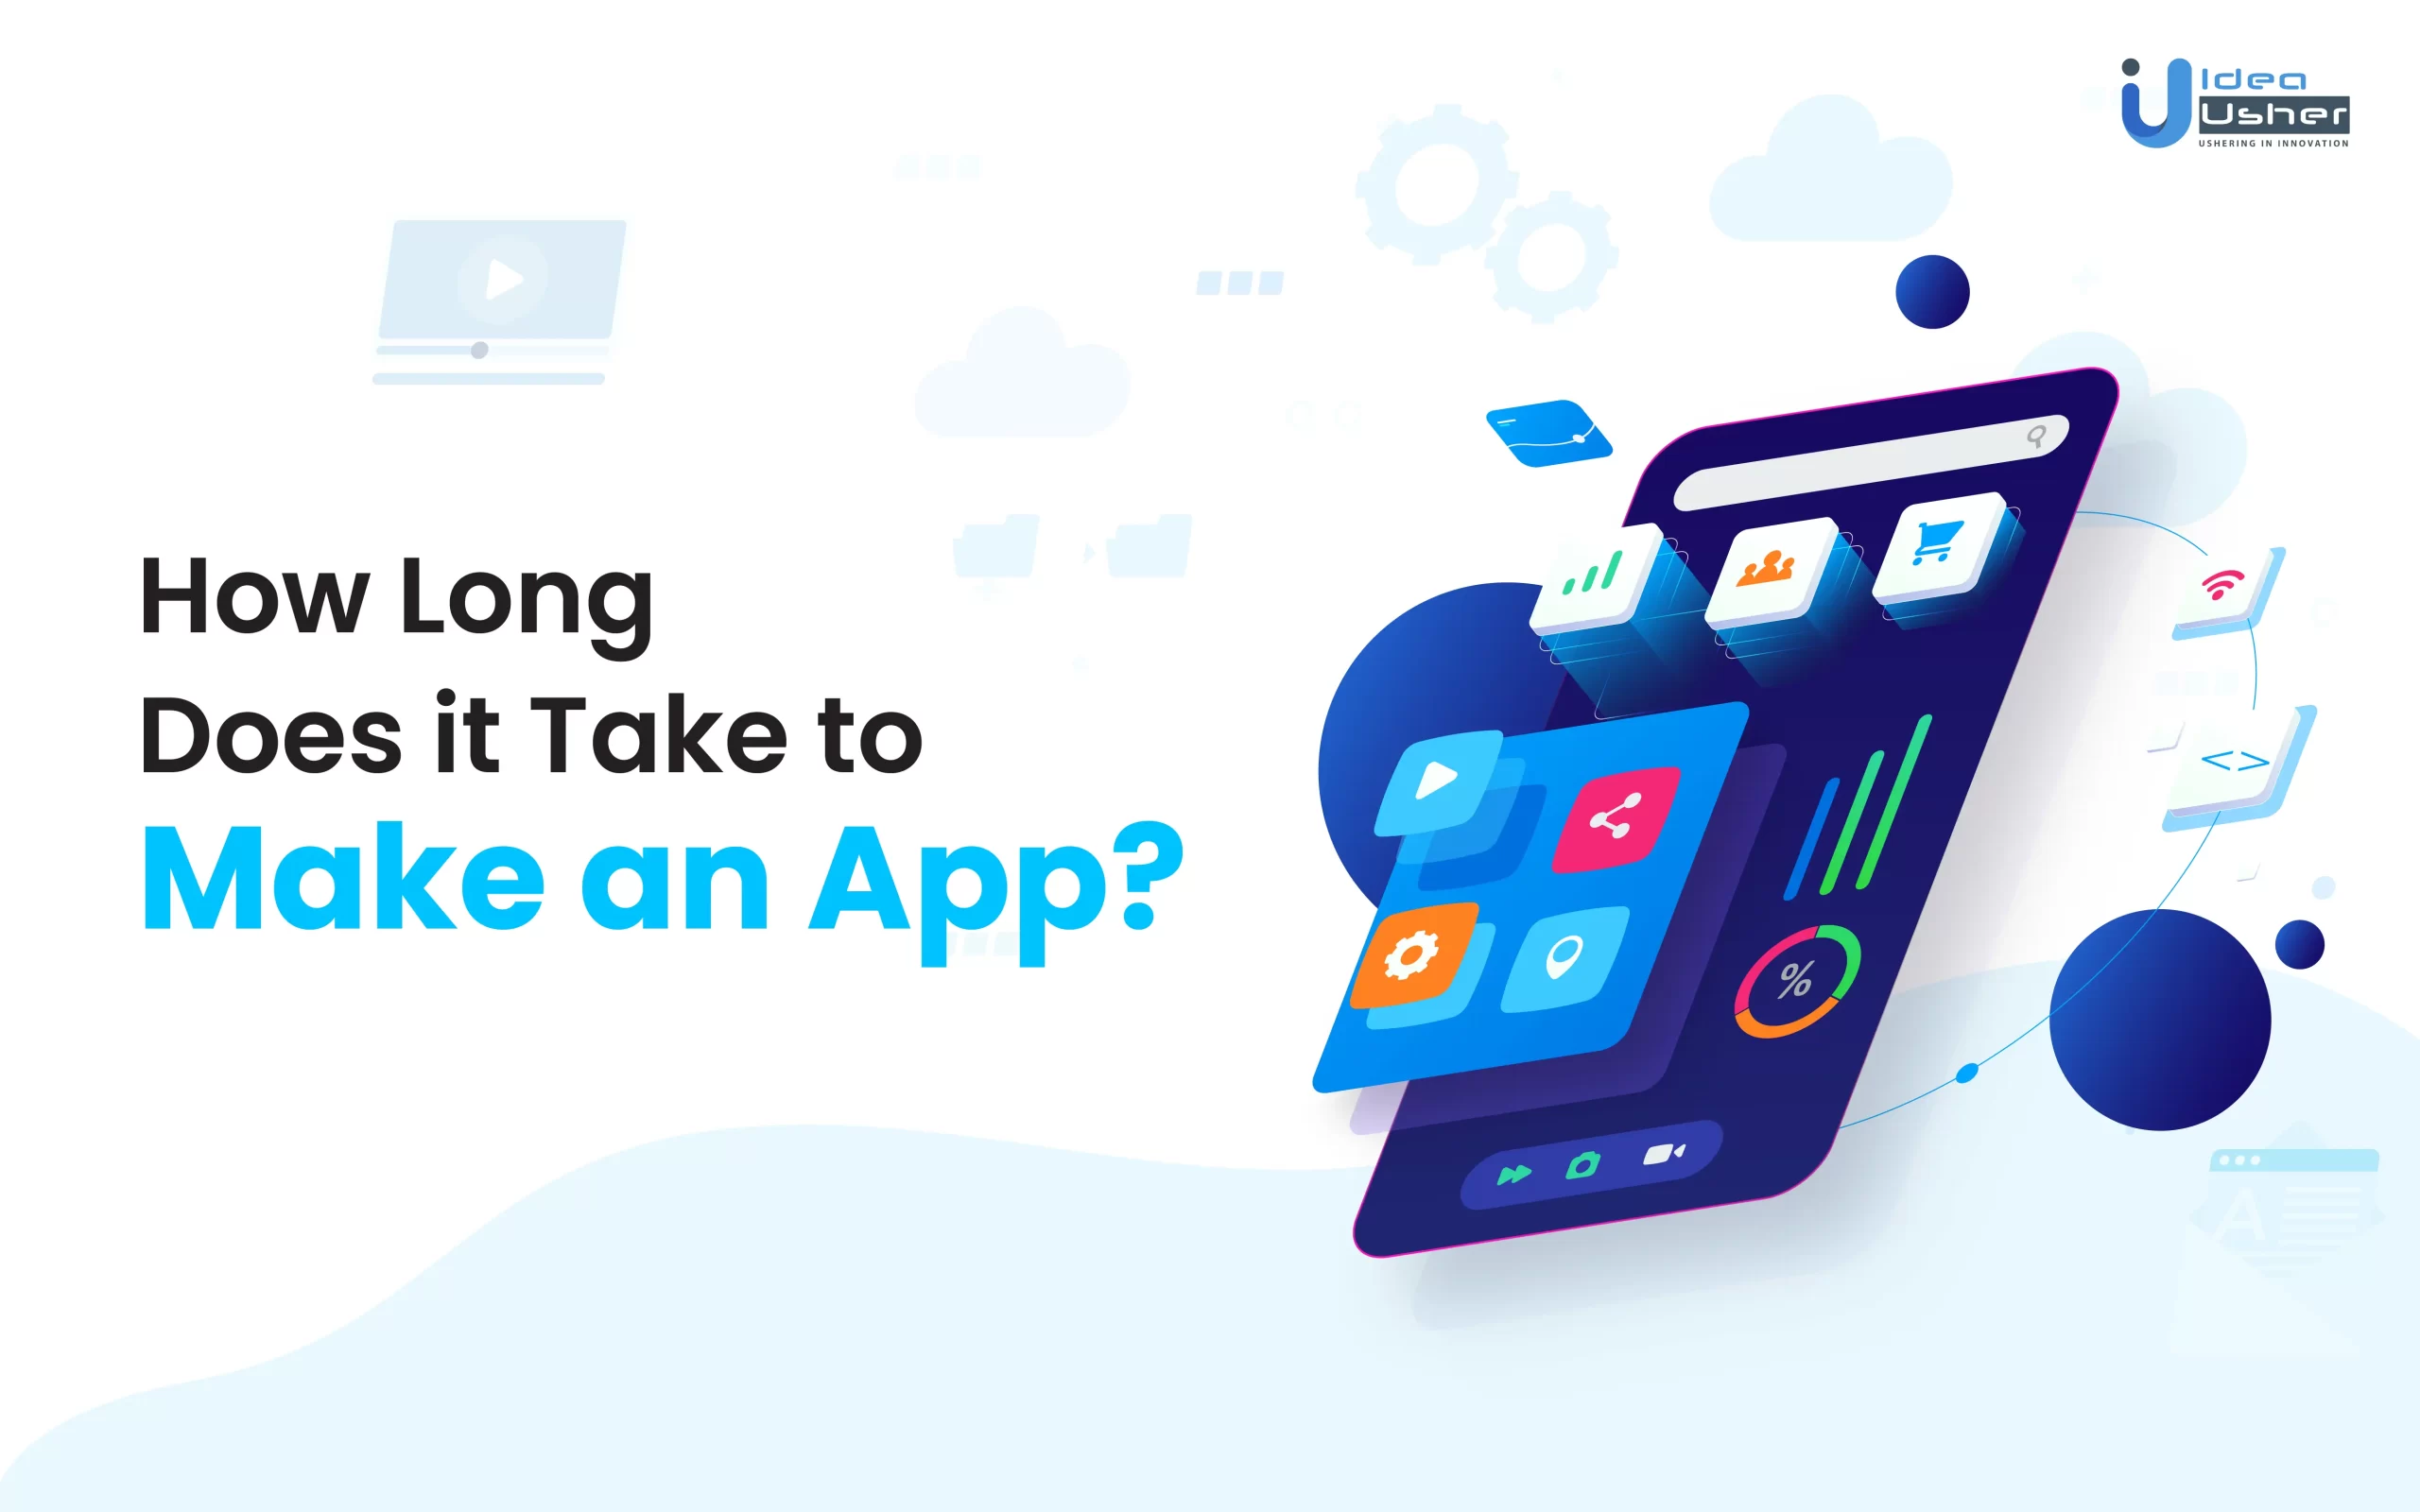 How long does it take to make an app